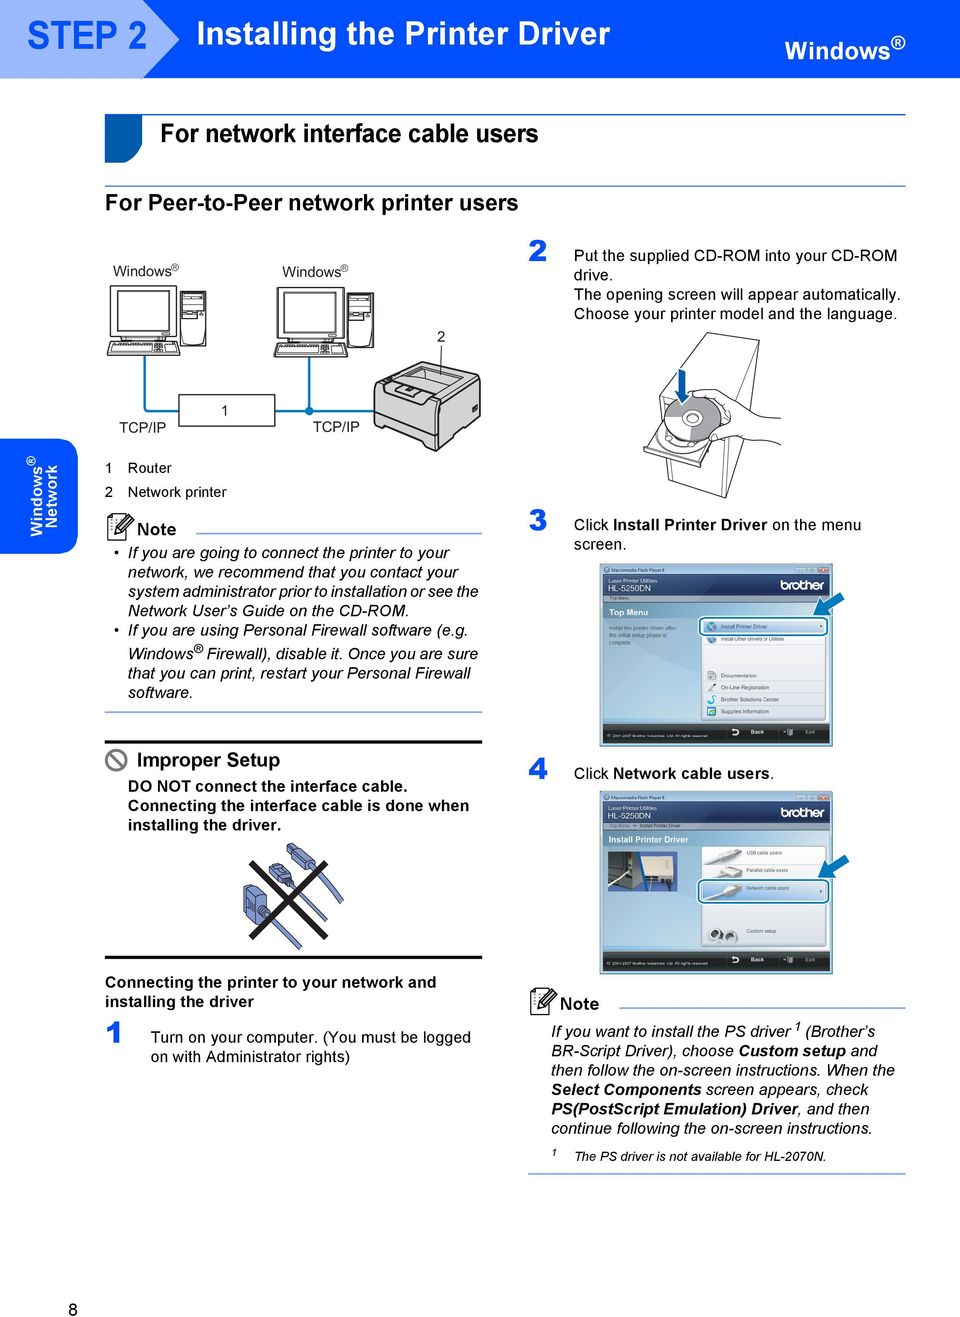 TCP/IP TCP/IP Network Router 2 Network printer If you are going to connect the printer to your network, we recommend that you contact your system administrator prior to installation or see the